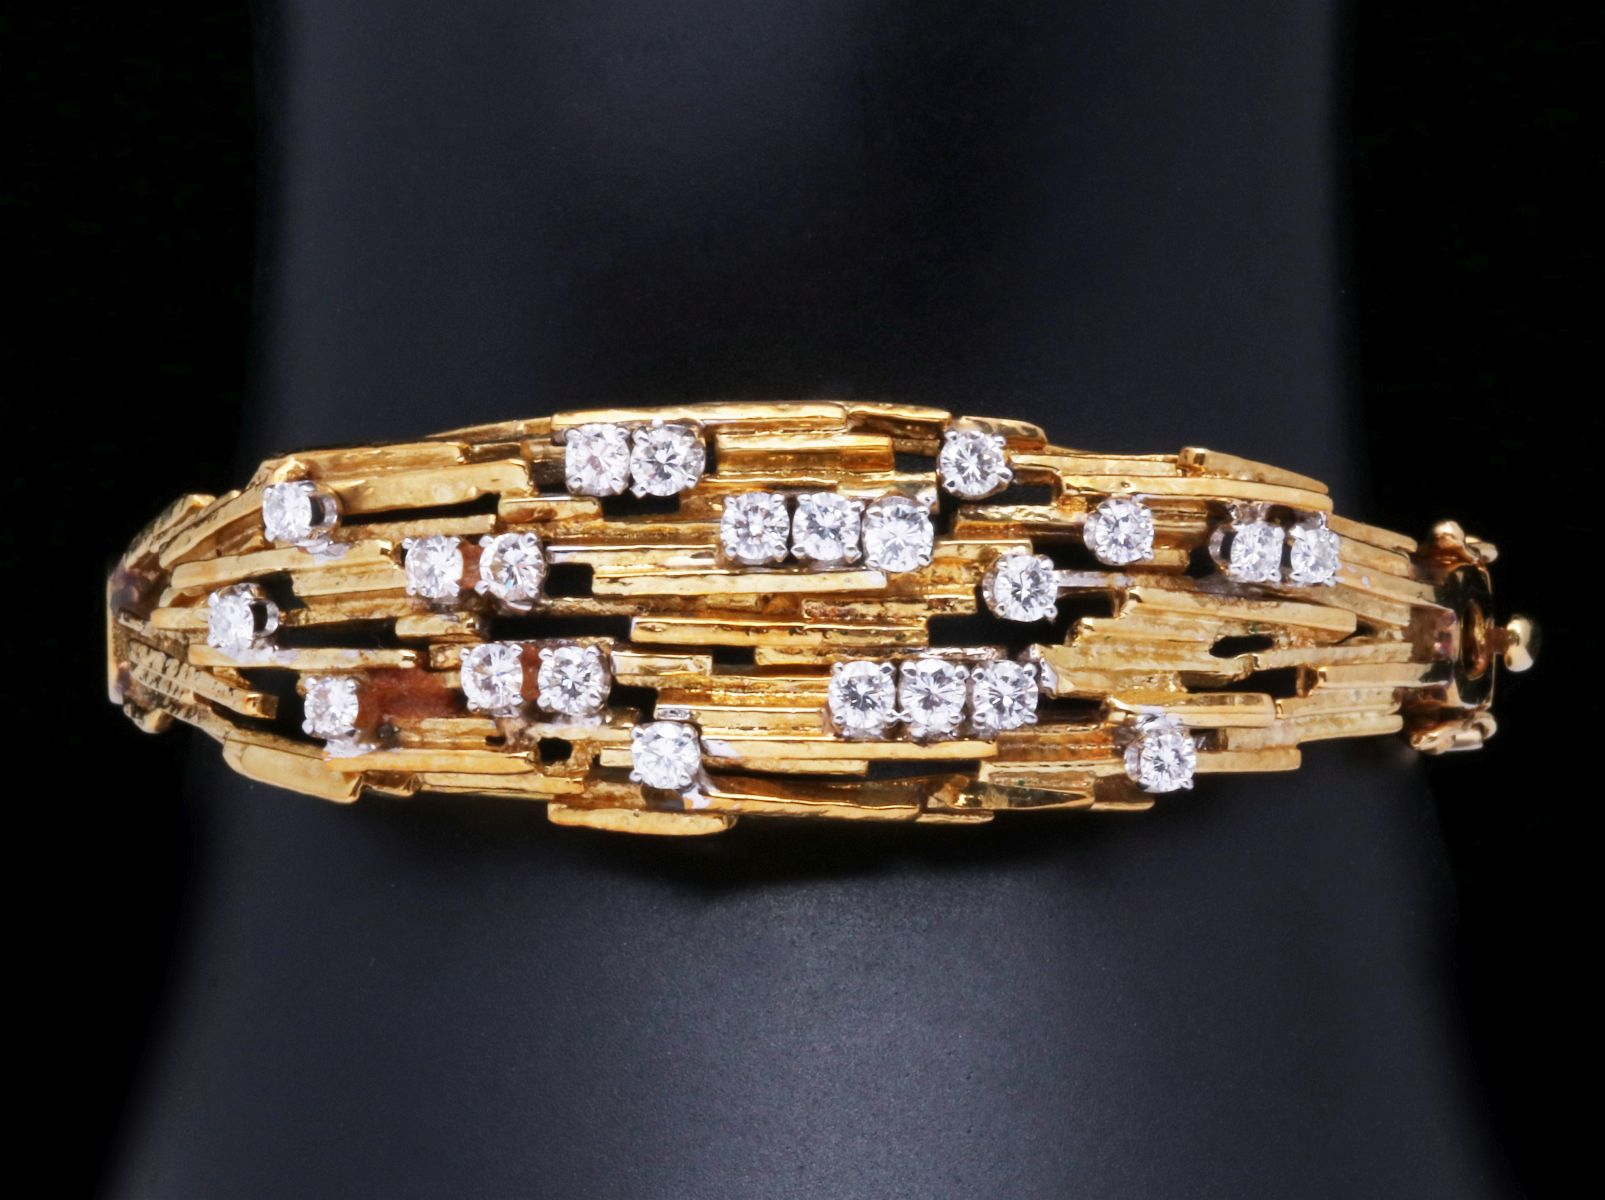 AN 18K GOLD AND DIAMOND BRACELET, APPROX. 1.75 CT.